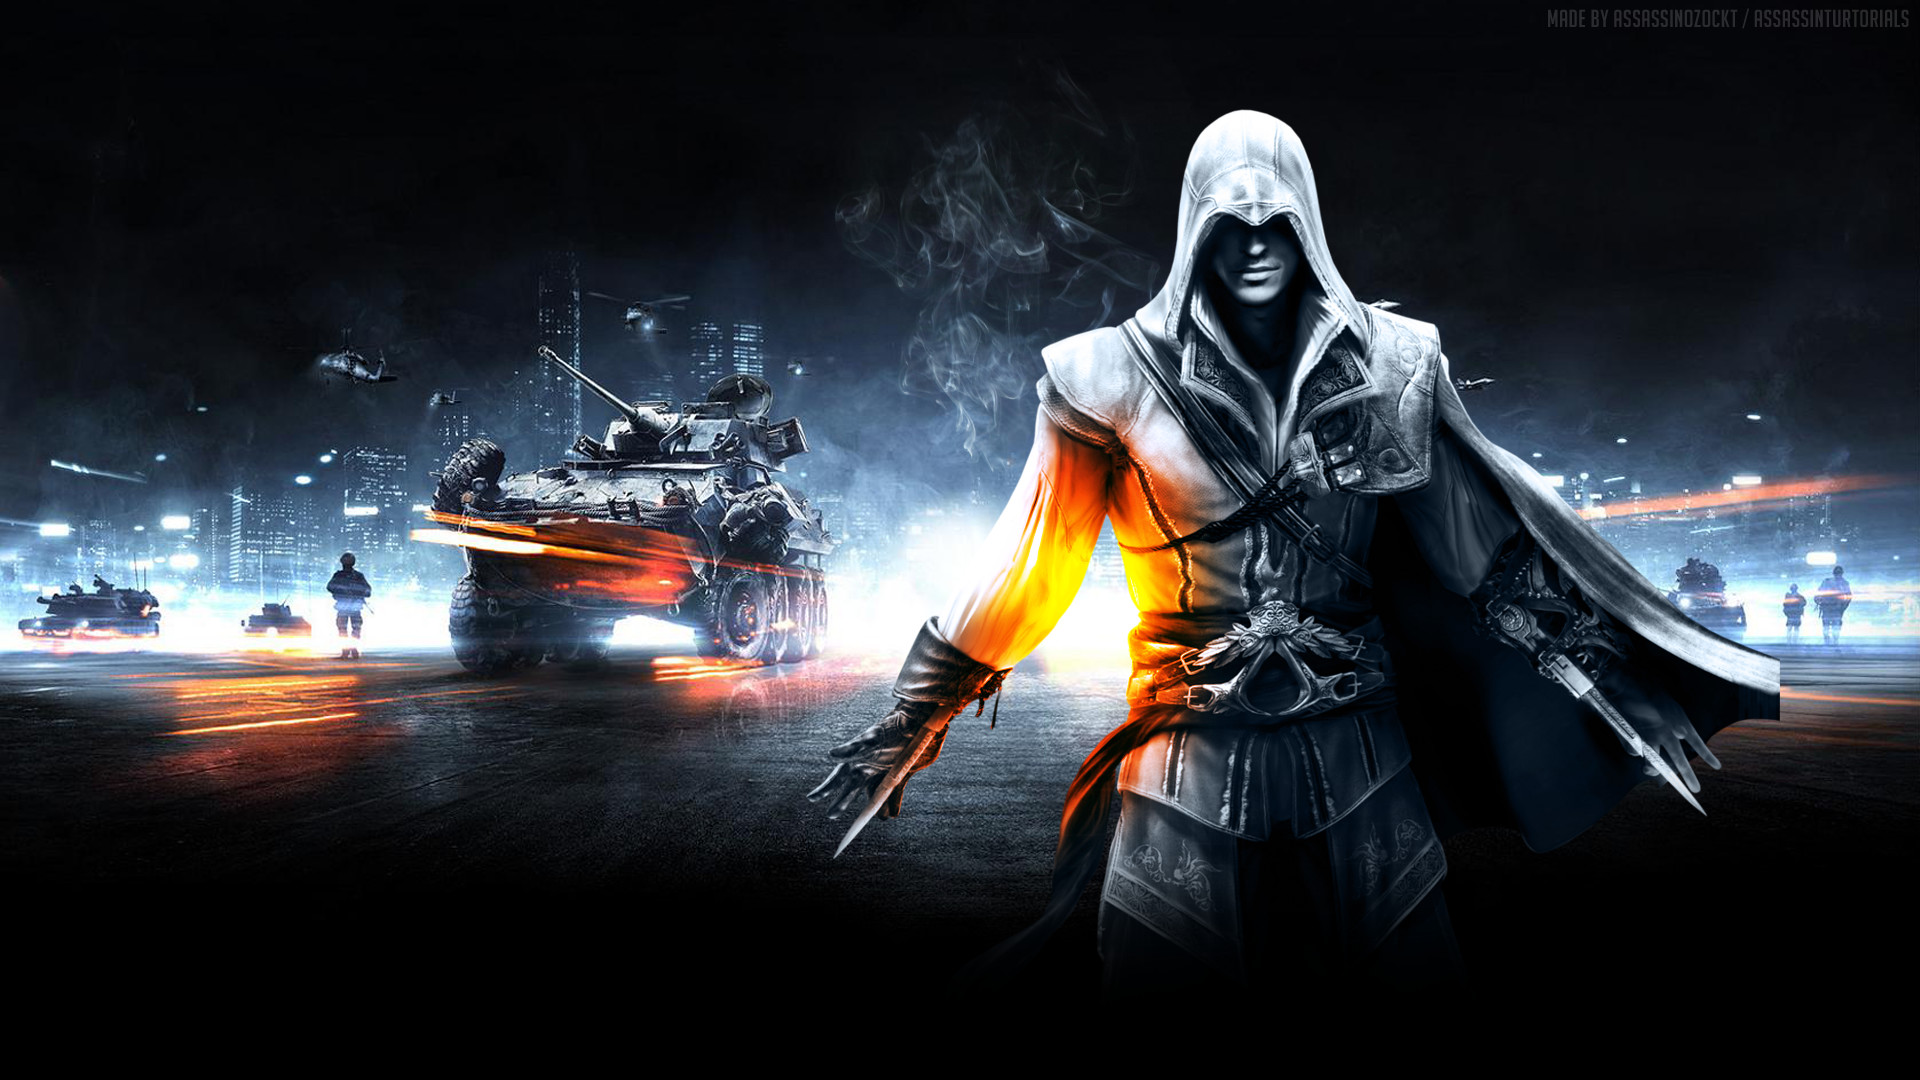 1920x1080 Video Game Backgrounds | Latest Hd Wallpapers - Computer Game PNG HD